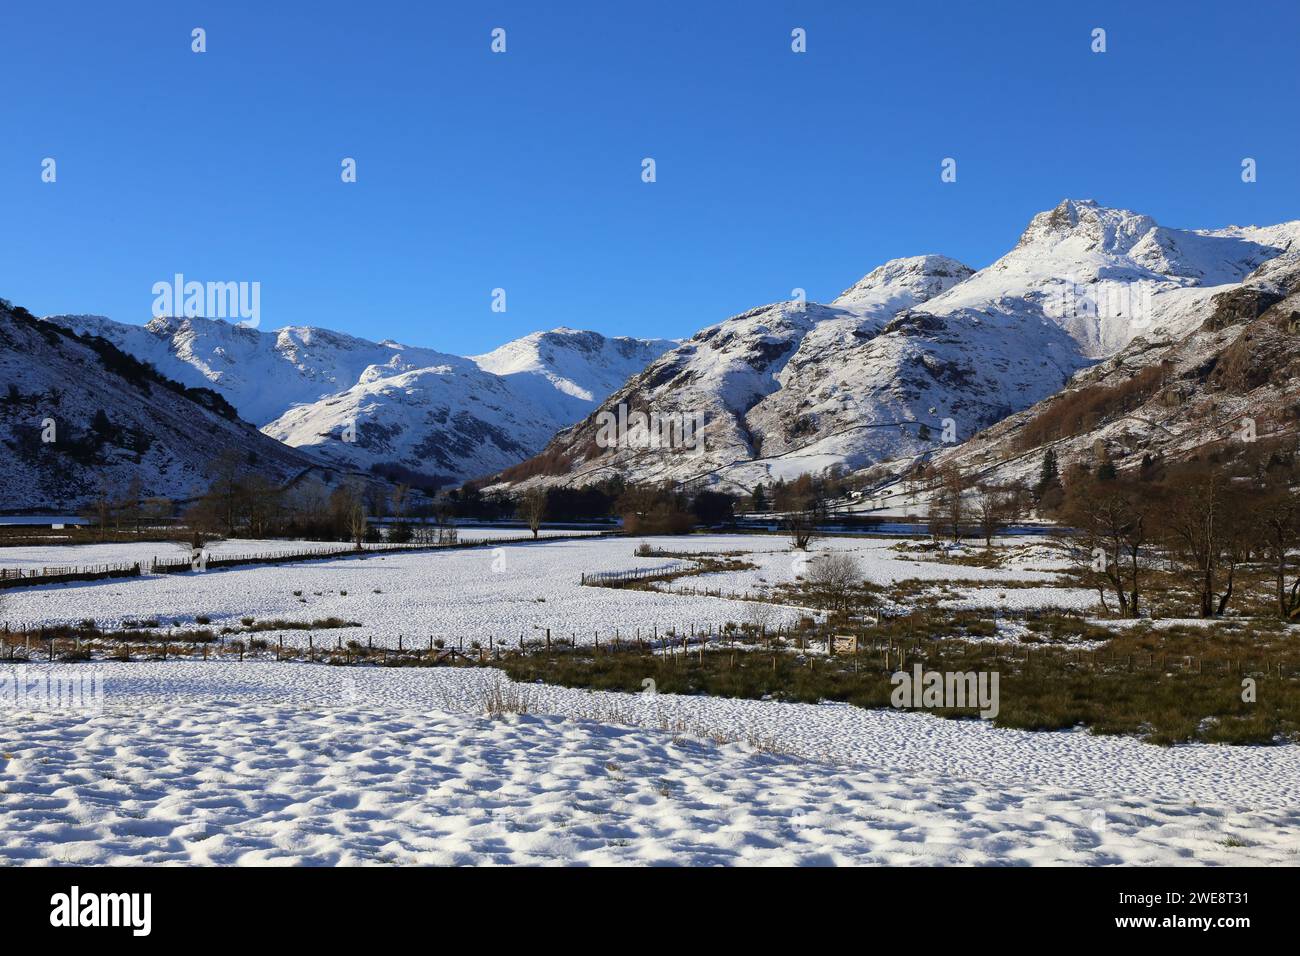 Langdale Valley, Pristine Winter View. Beautiful blue cloudless sky and fresh snow covering the valley floor and mountains. Stock Photo